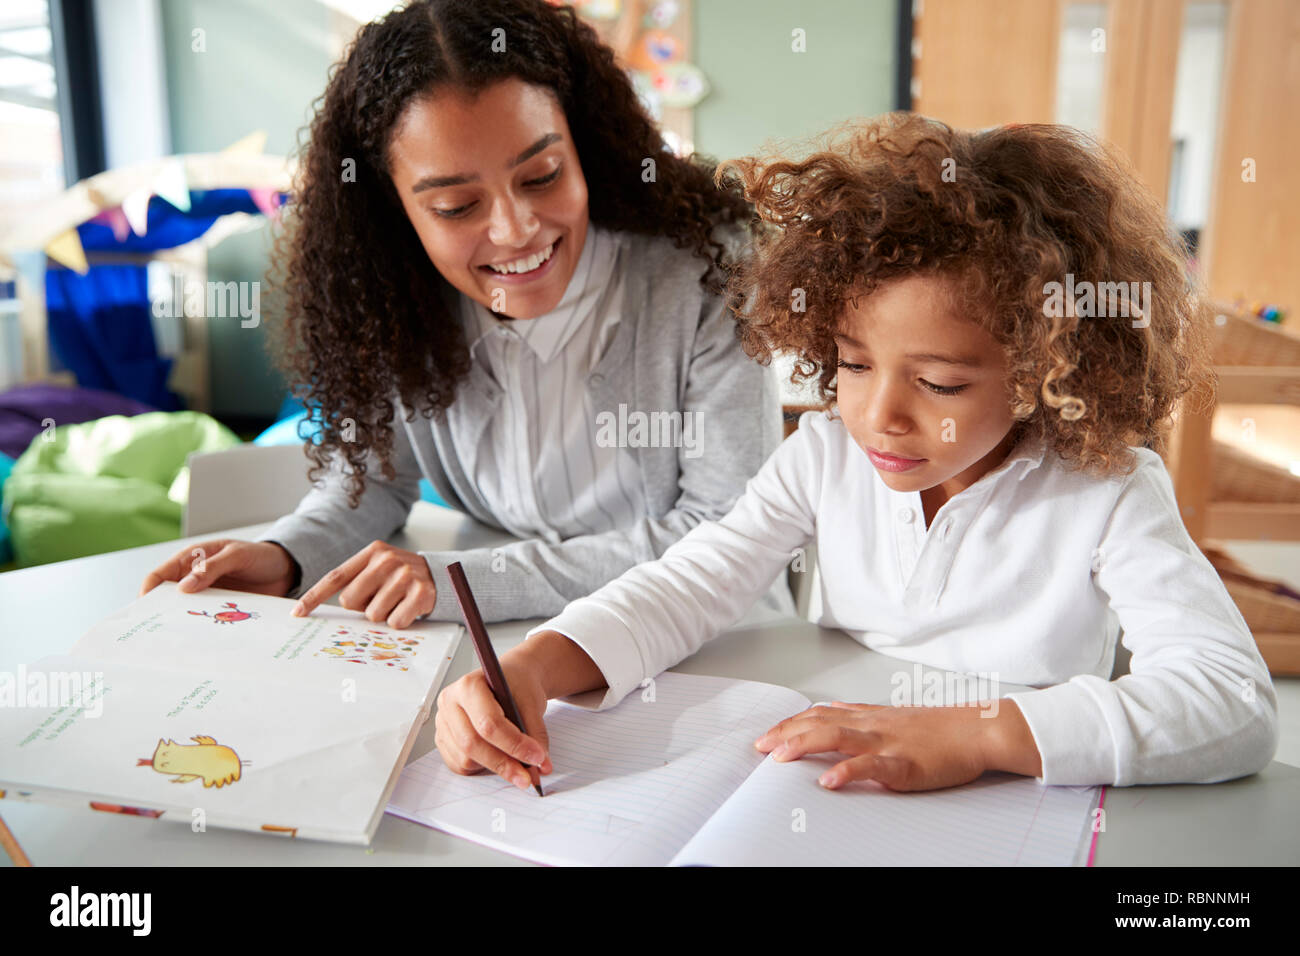 Female infant school teacher working one on one with a young schoolgirl sitting at a table writing in a classroom, front view, close up Stock Photo